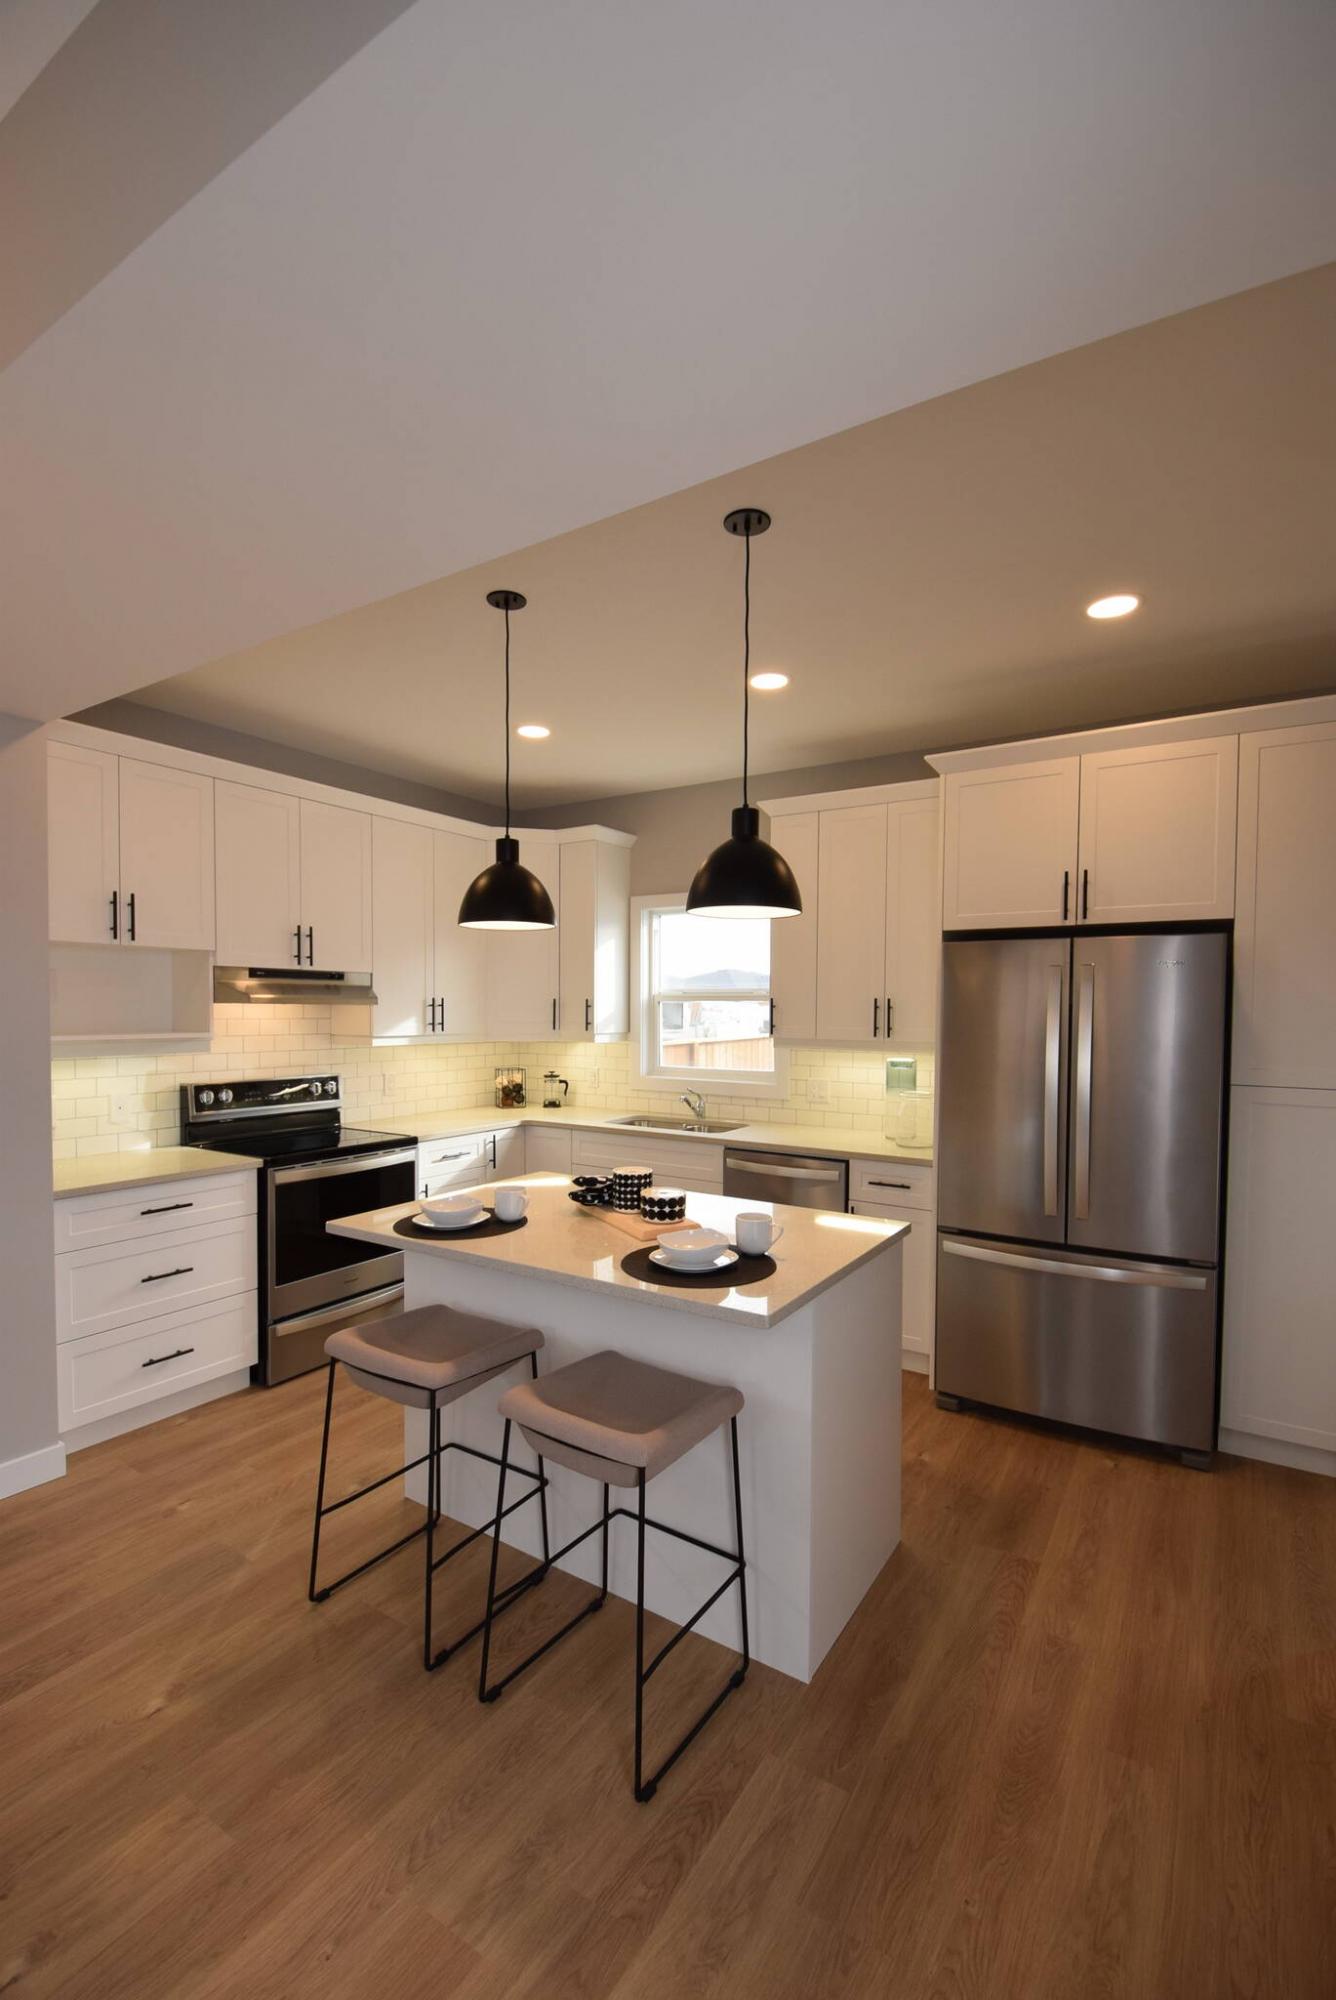 <p>Todd Lewys / Winnipeg Free Press files</p><p>The MHBA&rsquo;s Parade of Homes is on now and offers a great chance to see the latest and greatest in new homes.</p>